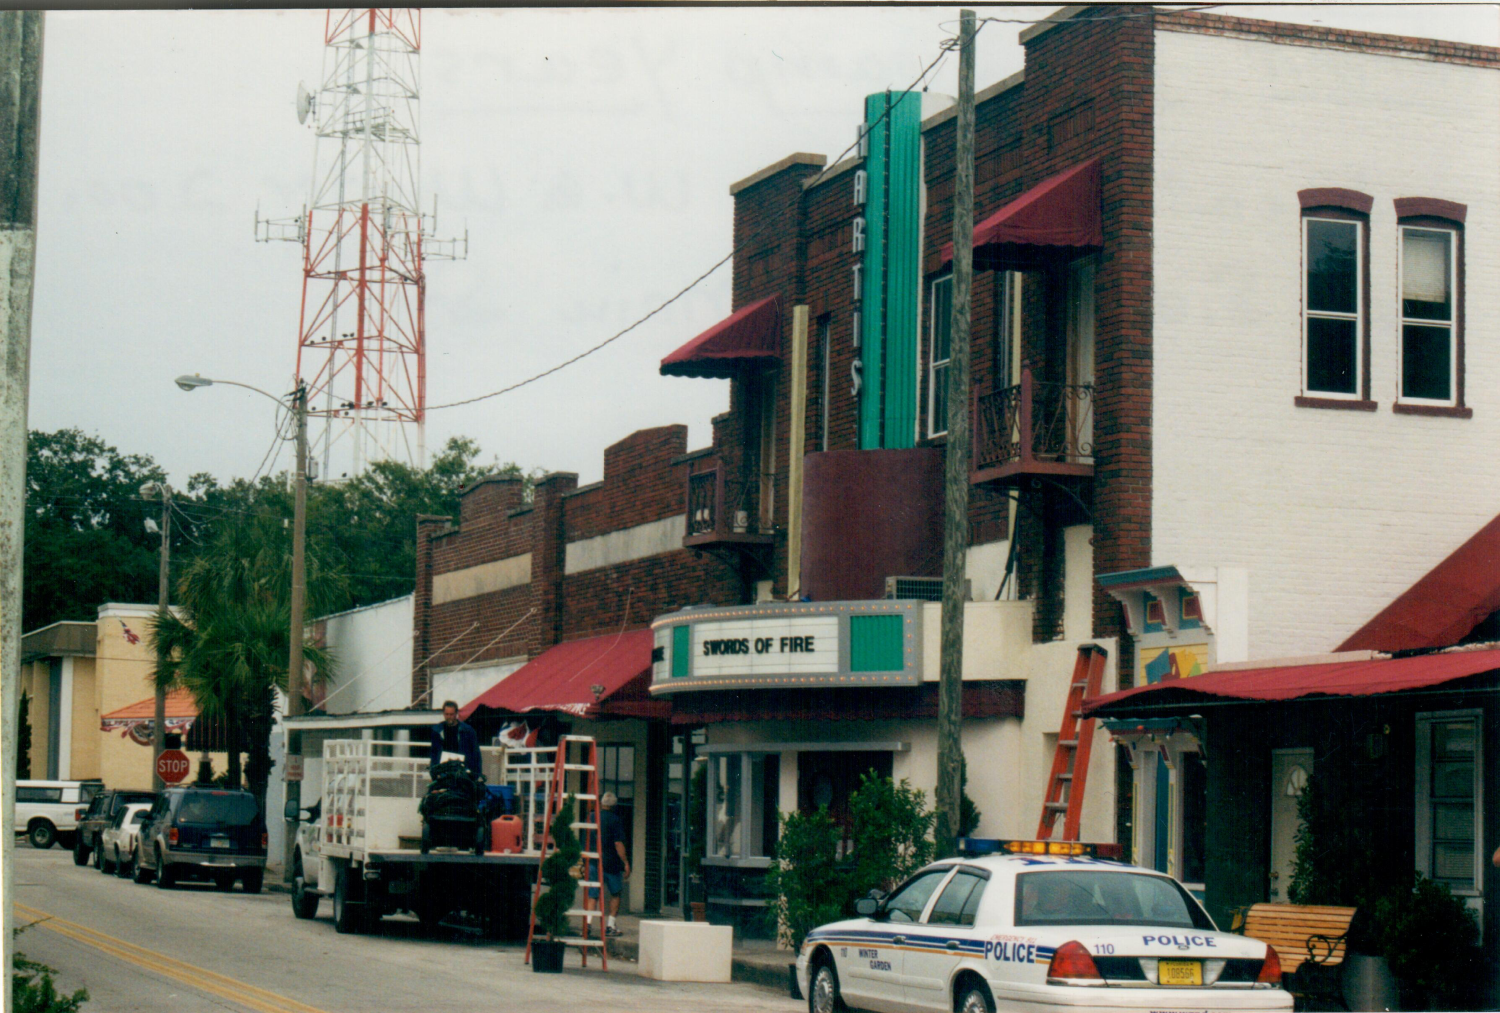 The Gem Theatre was opened on South Main Street in 1941 in a structure originally built as a department store. It closed in 1948. In 2001, it donned a theater look again while the Muppets movie “Kermit’s Swamp Years” was filmed.